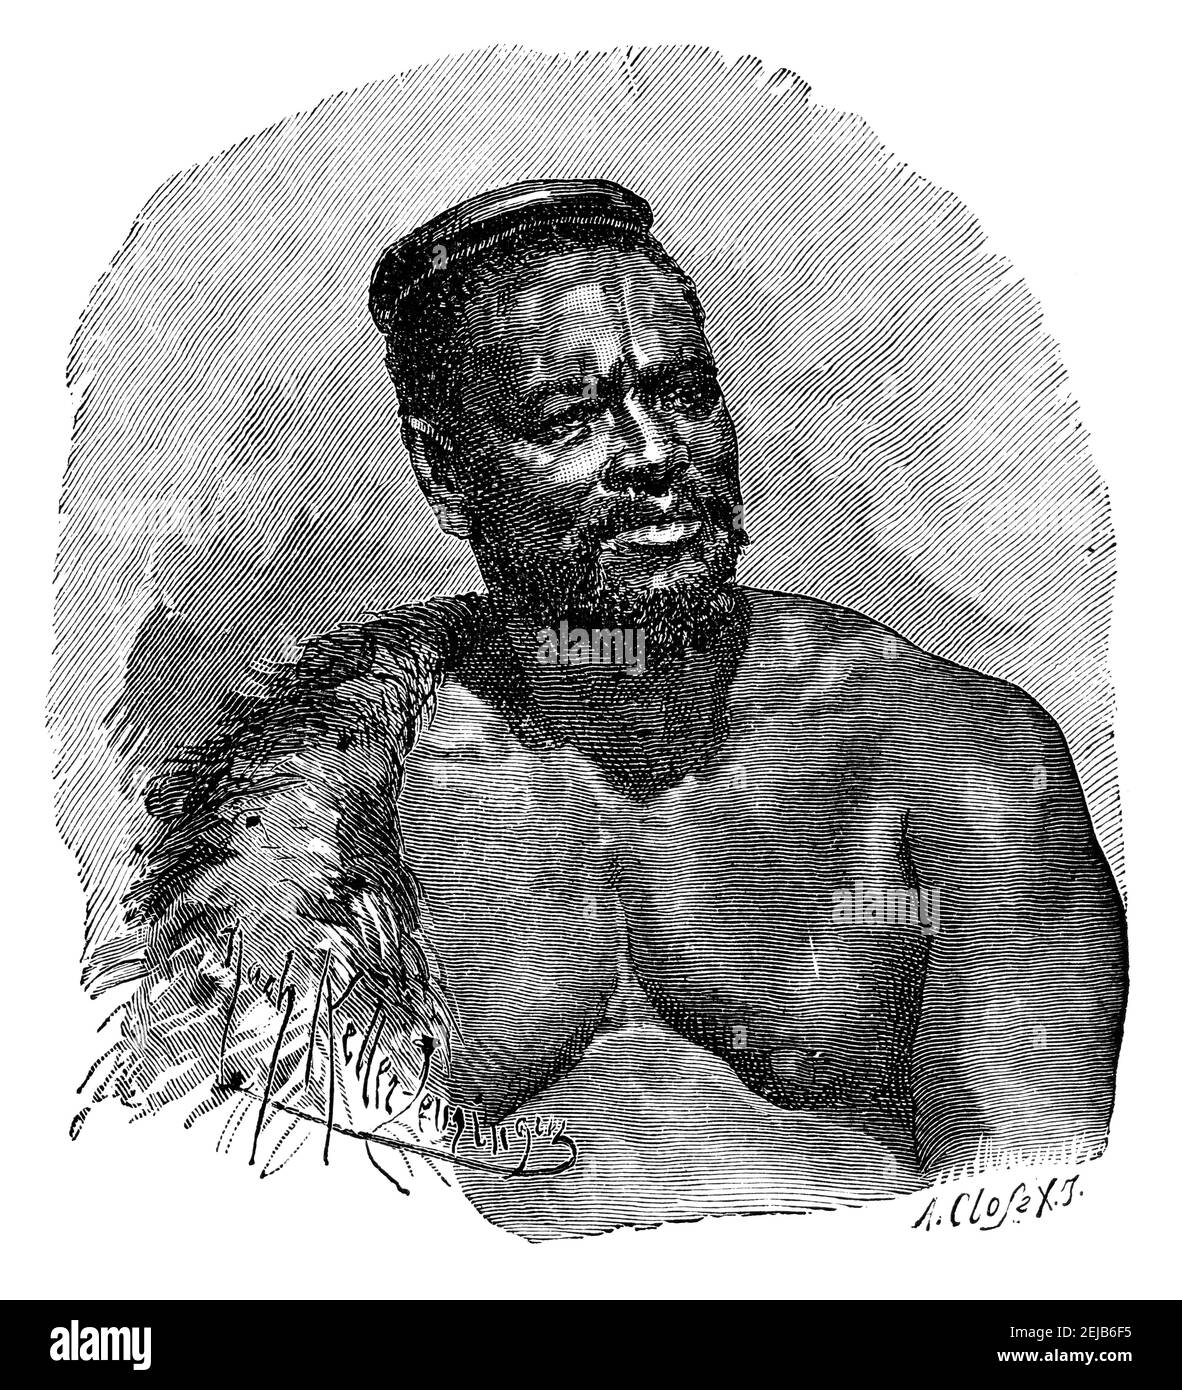 King of Zulu people.Culture and history of Africa. Vintage antique black and white illustration. 19th century. Stock Photo